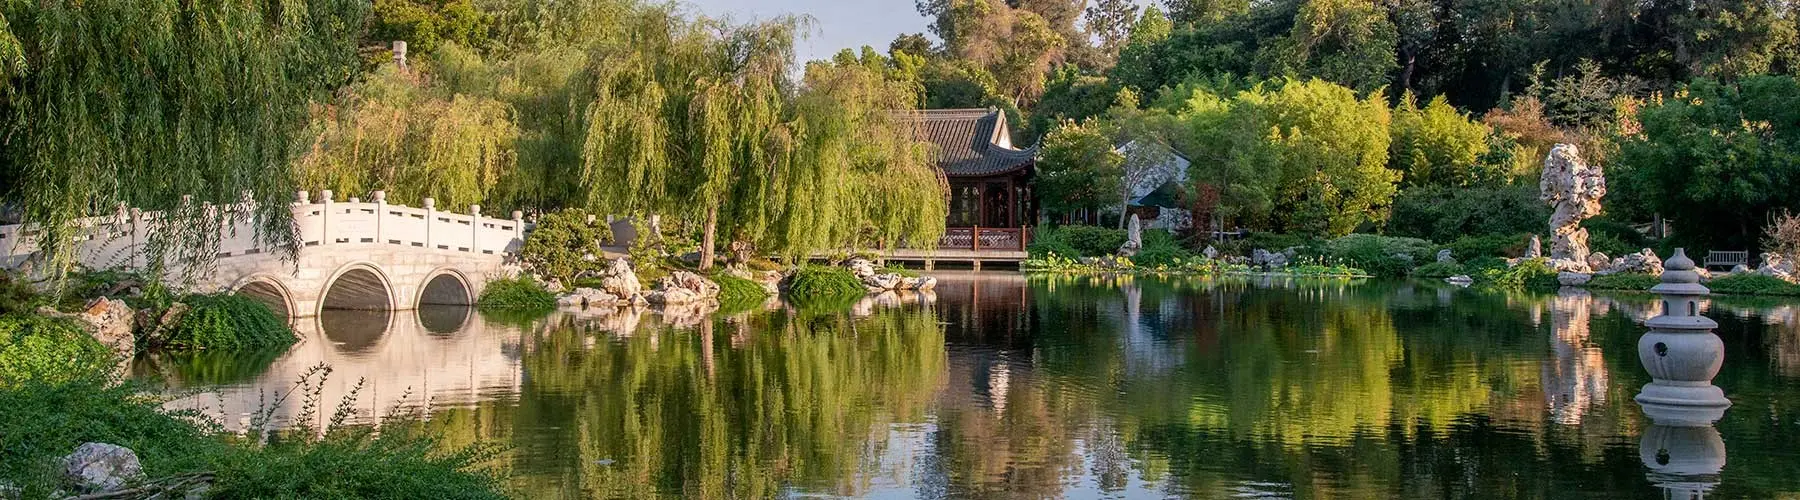 chinese garden with trees, bridge and lake